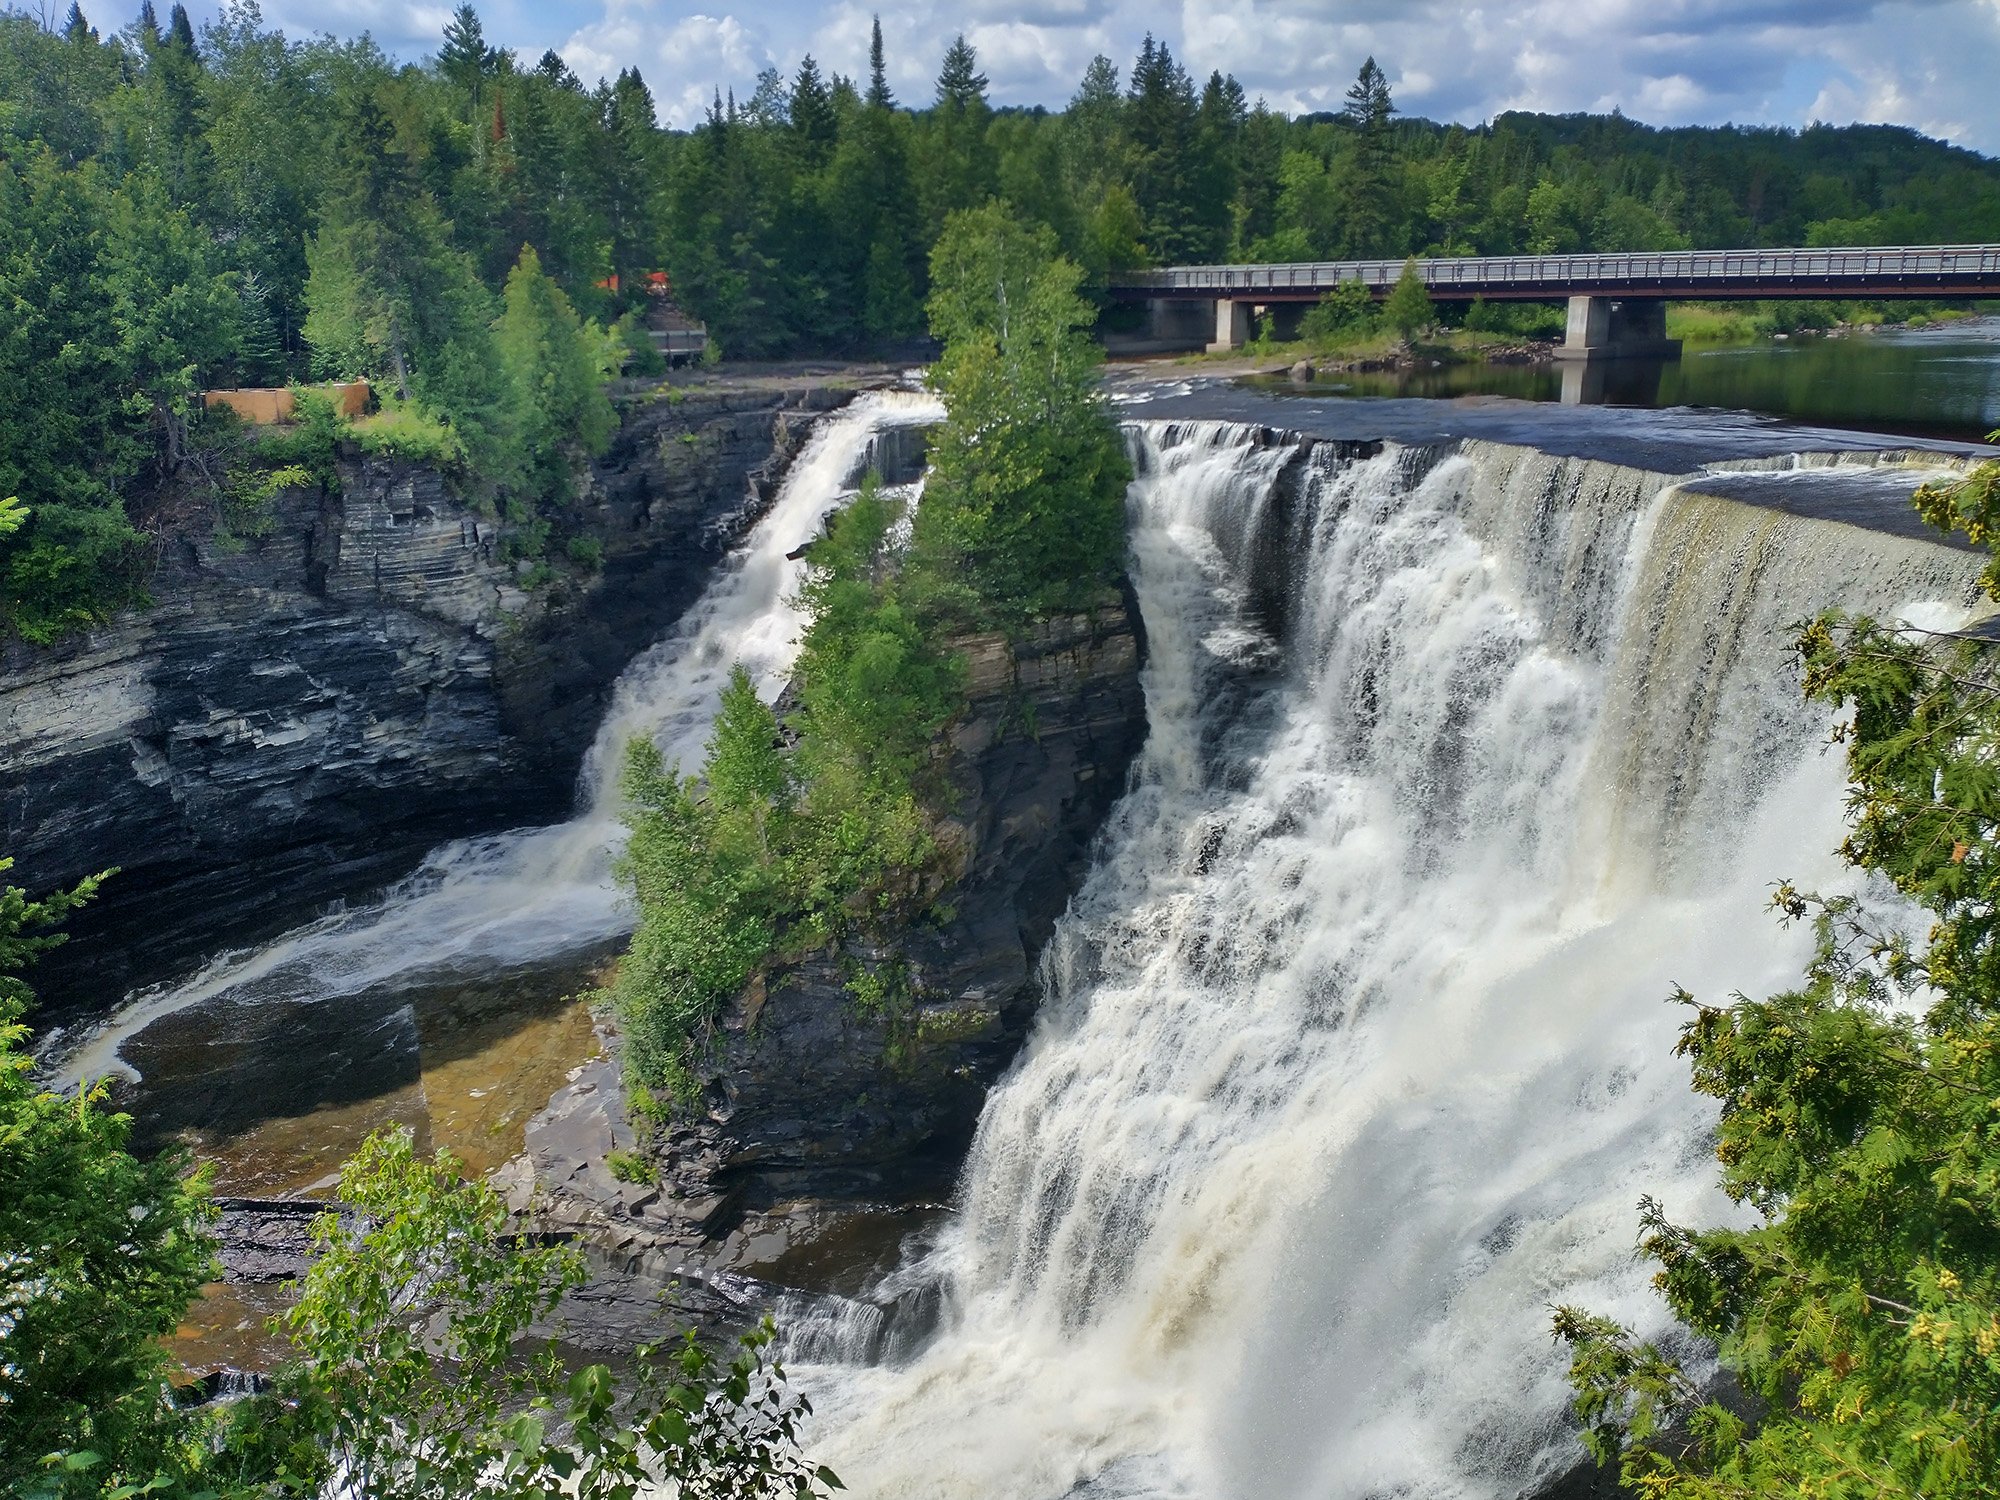 Kakabeka falls. They're pretty good! Worth the detour and right off the road, no big hikes.